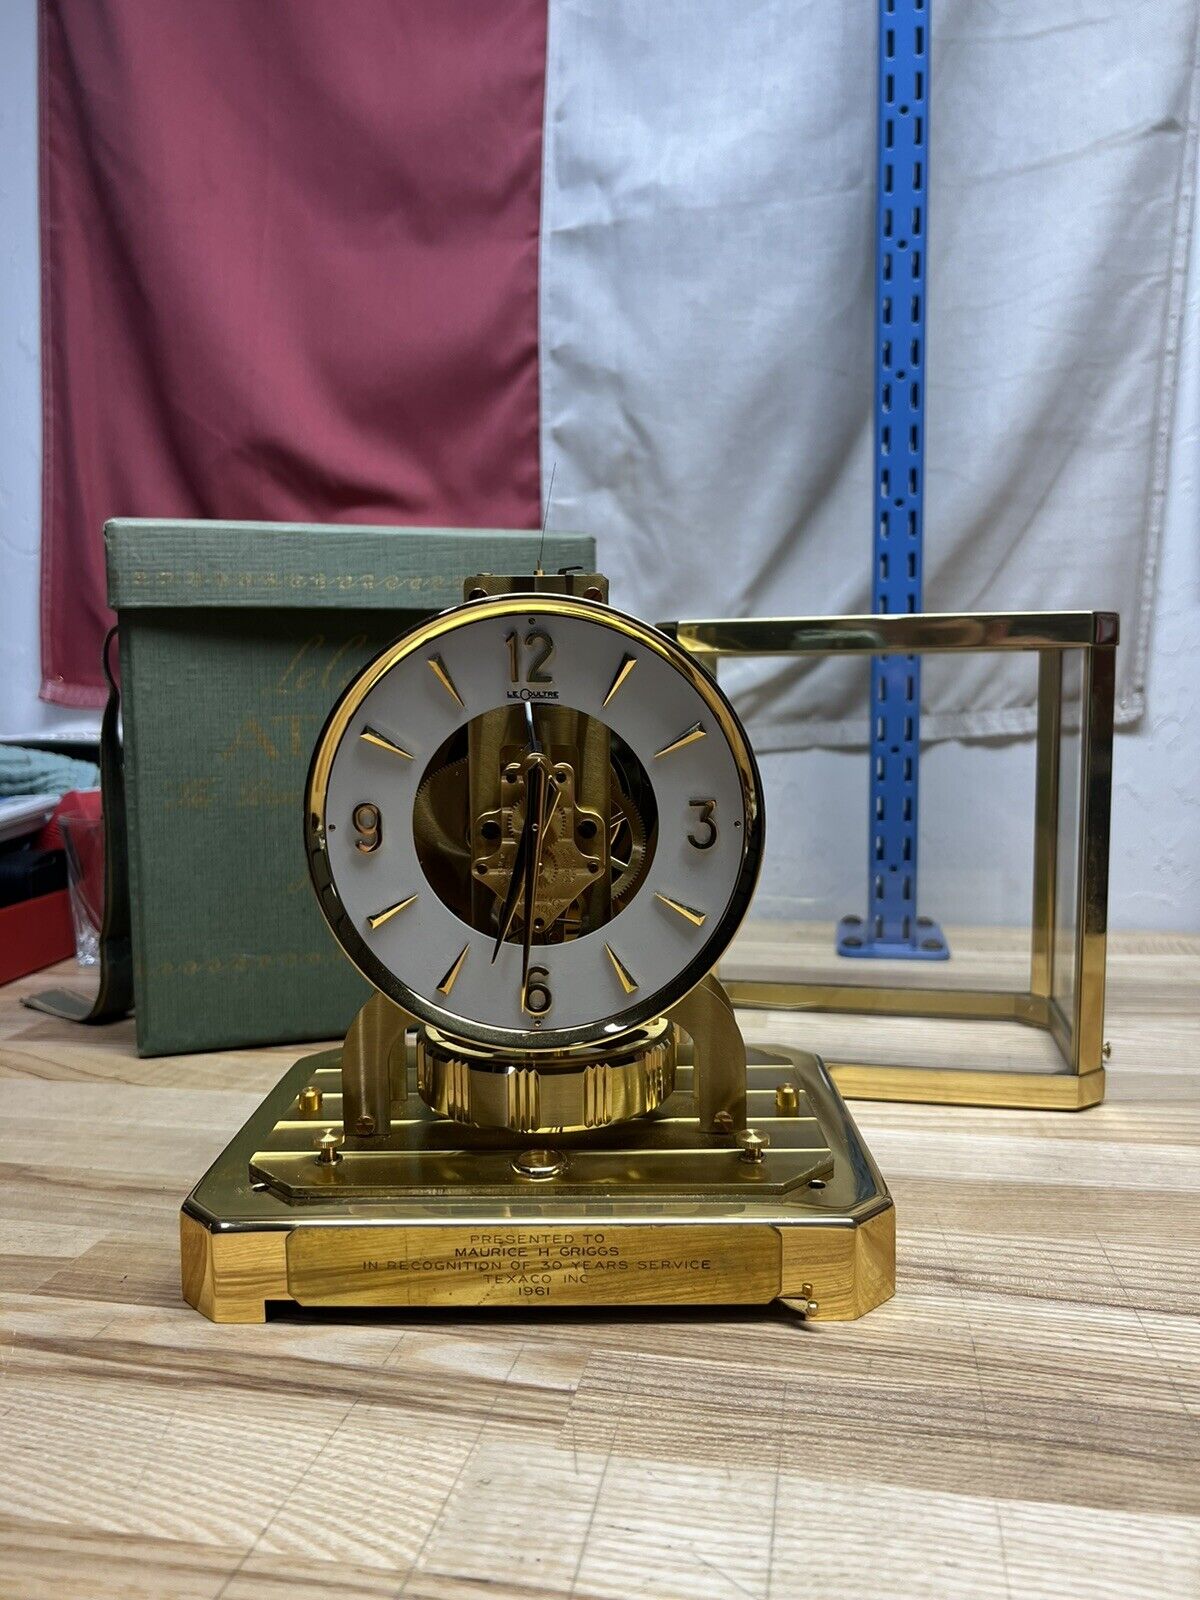 Vintage Le Coultre Atmos Clock No. 528-6, 1960-1961 #135855 With Box And Papers